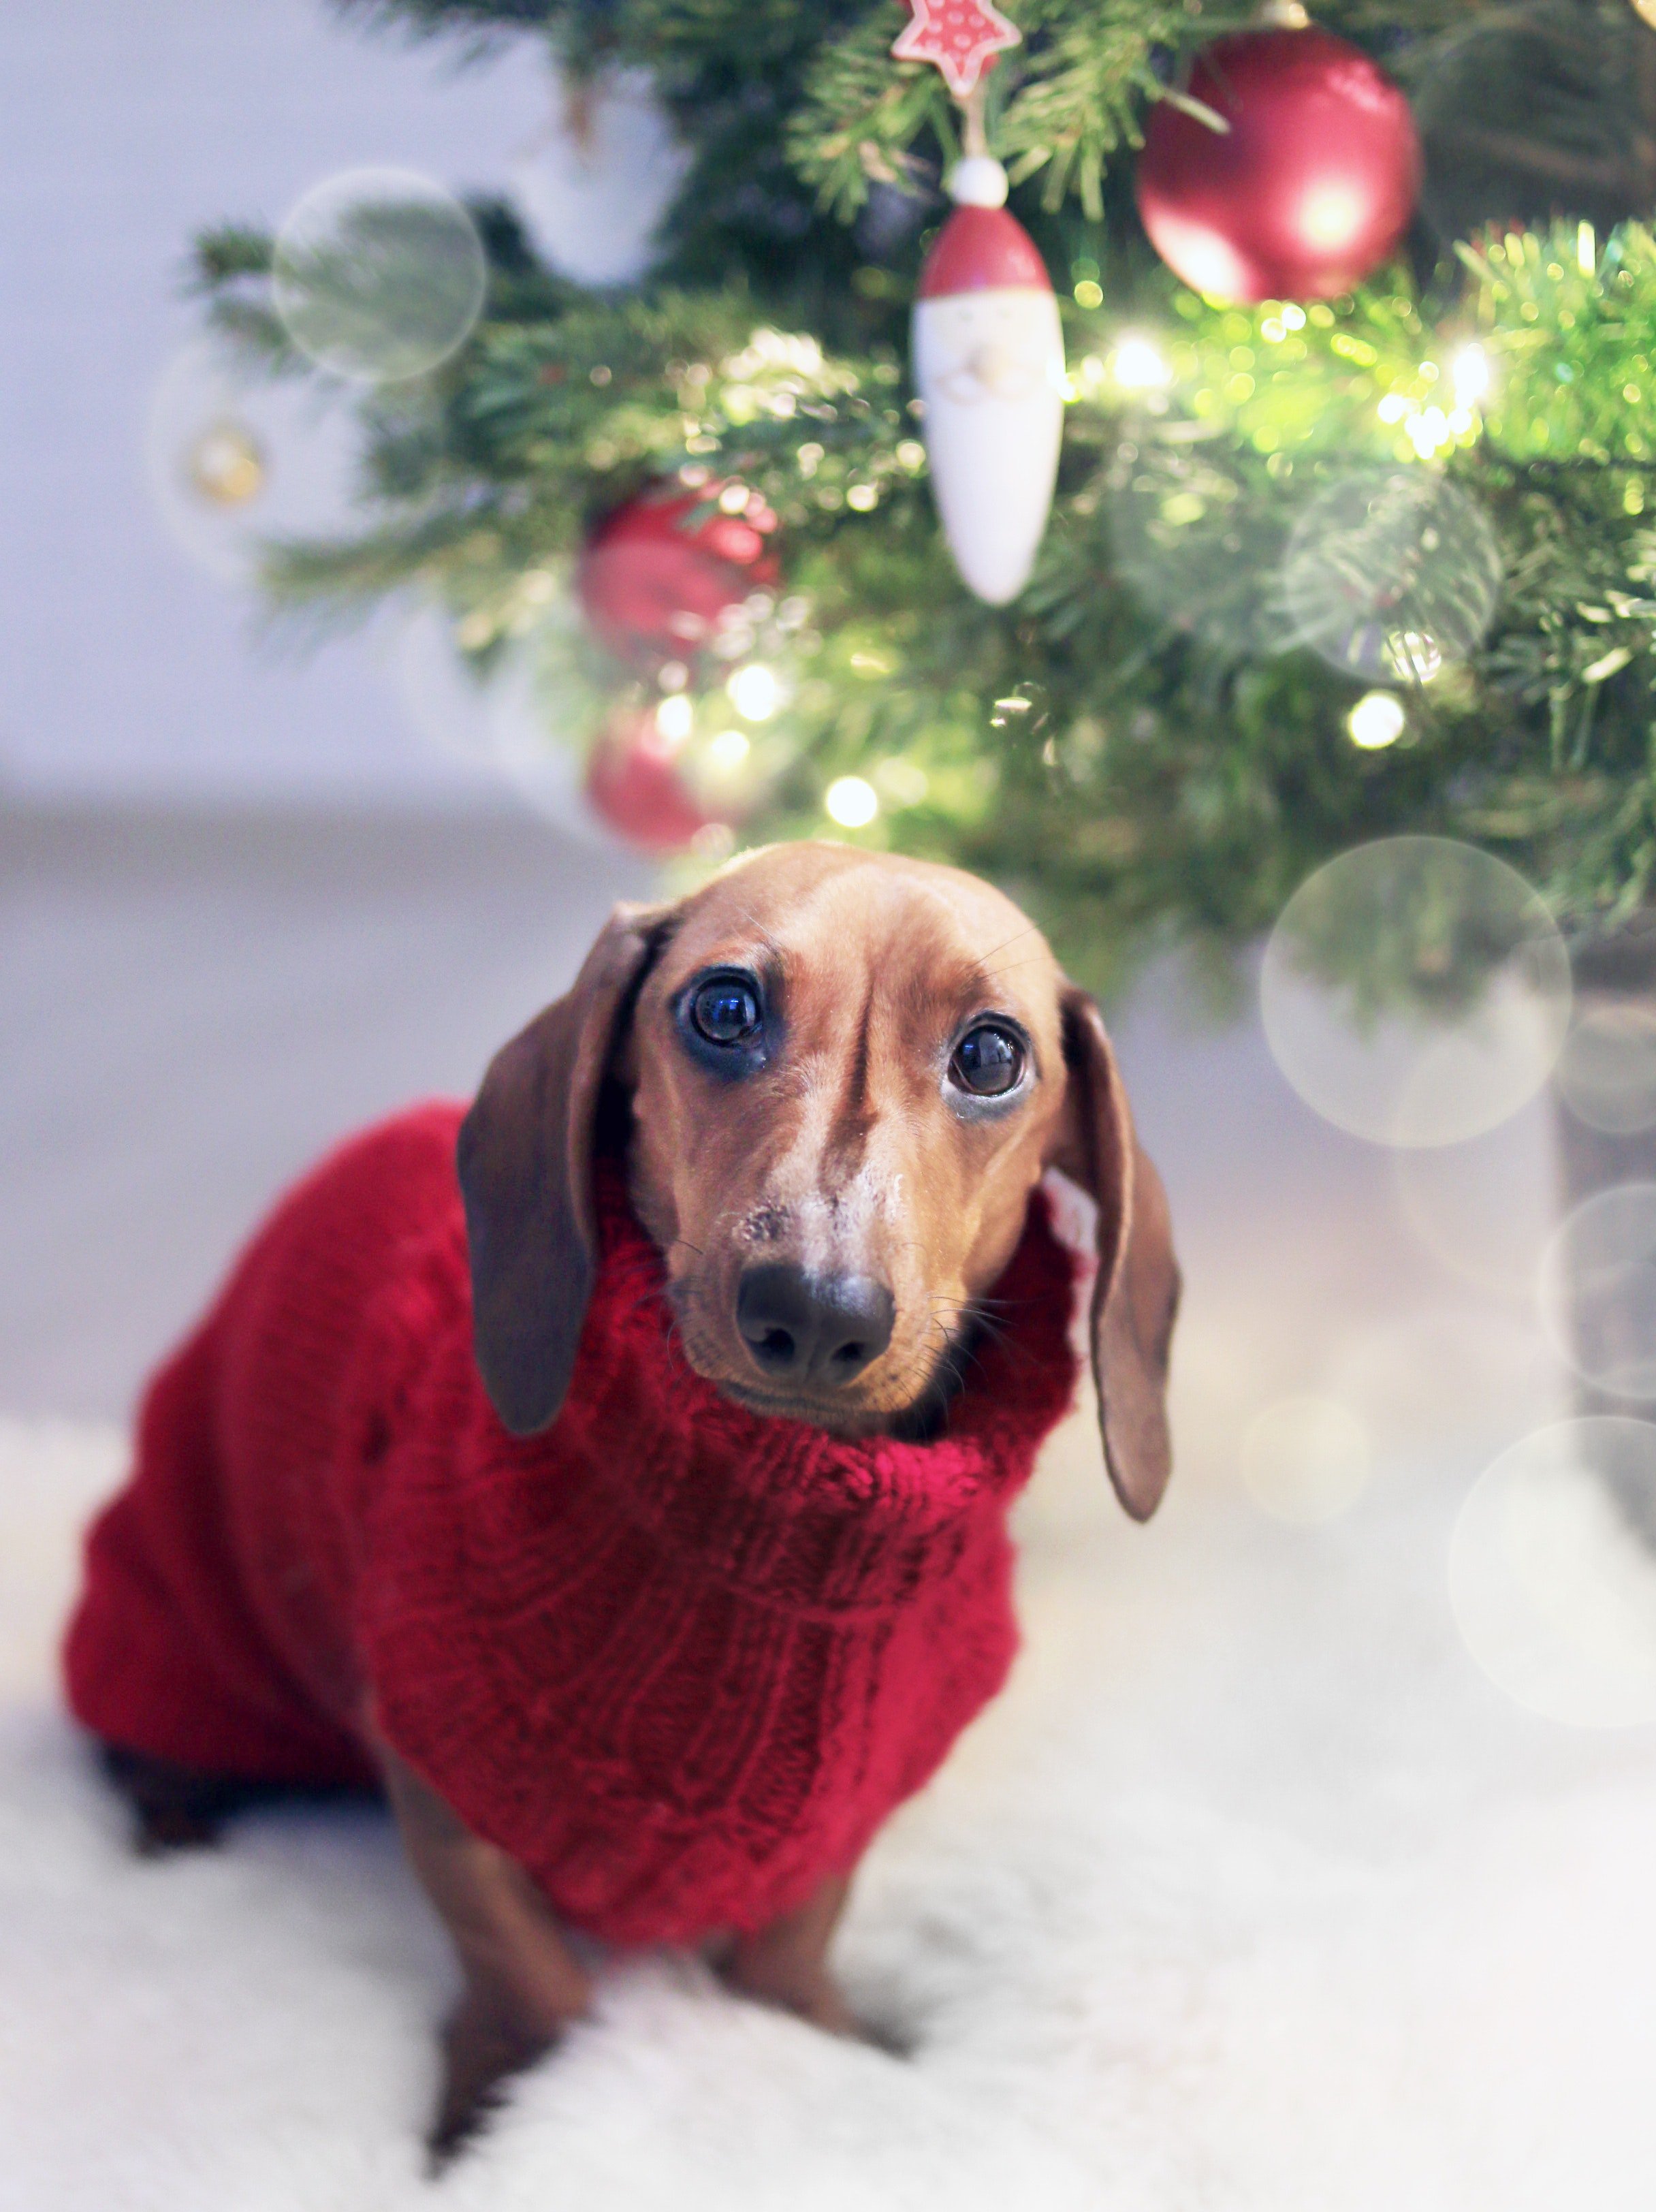 A Dachshund wearing a red sweater sitting next to a Christmas tree. | Source: Pexels.